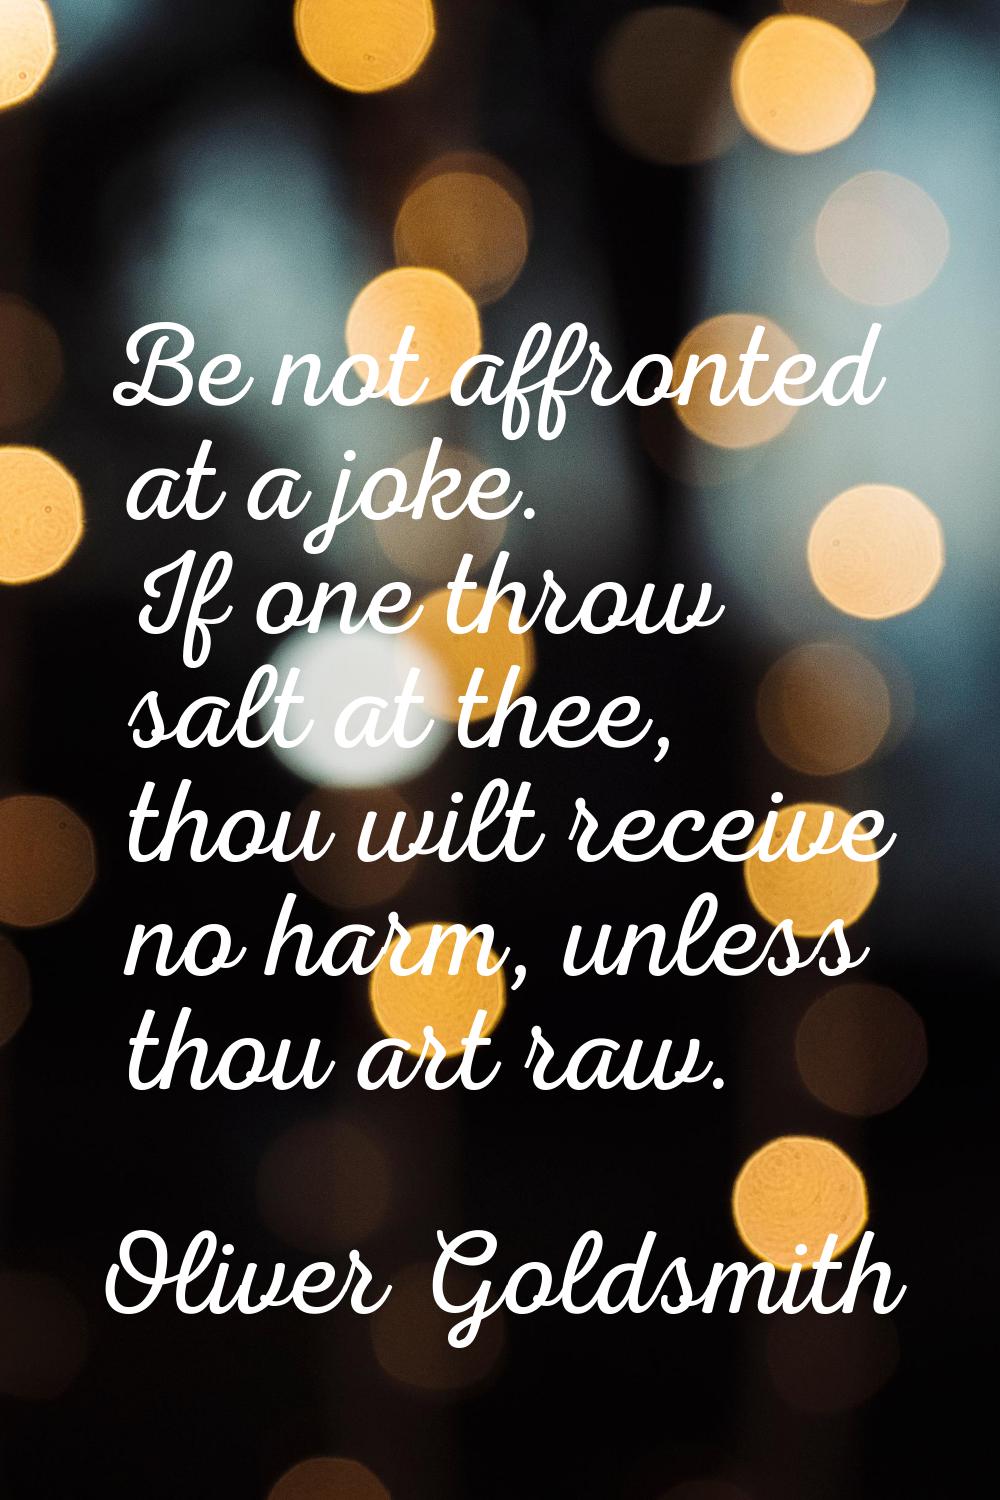 Be not affronted at a joke. If one throw salt at thee, thou wilt receive no harm, unless thou art r